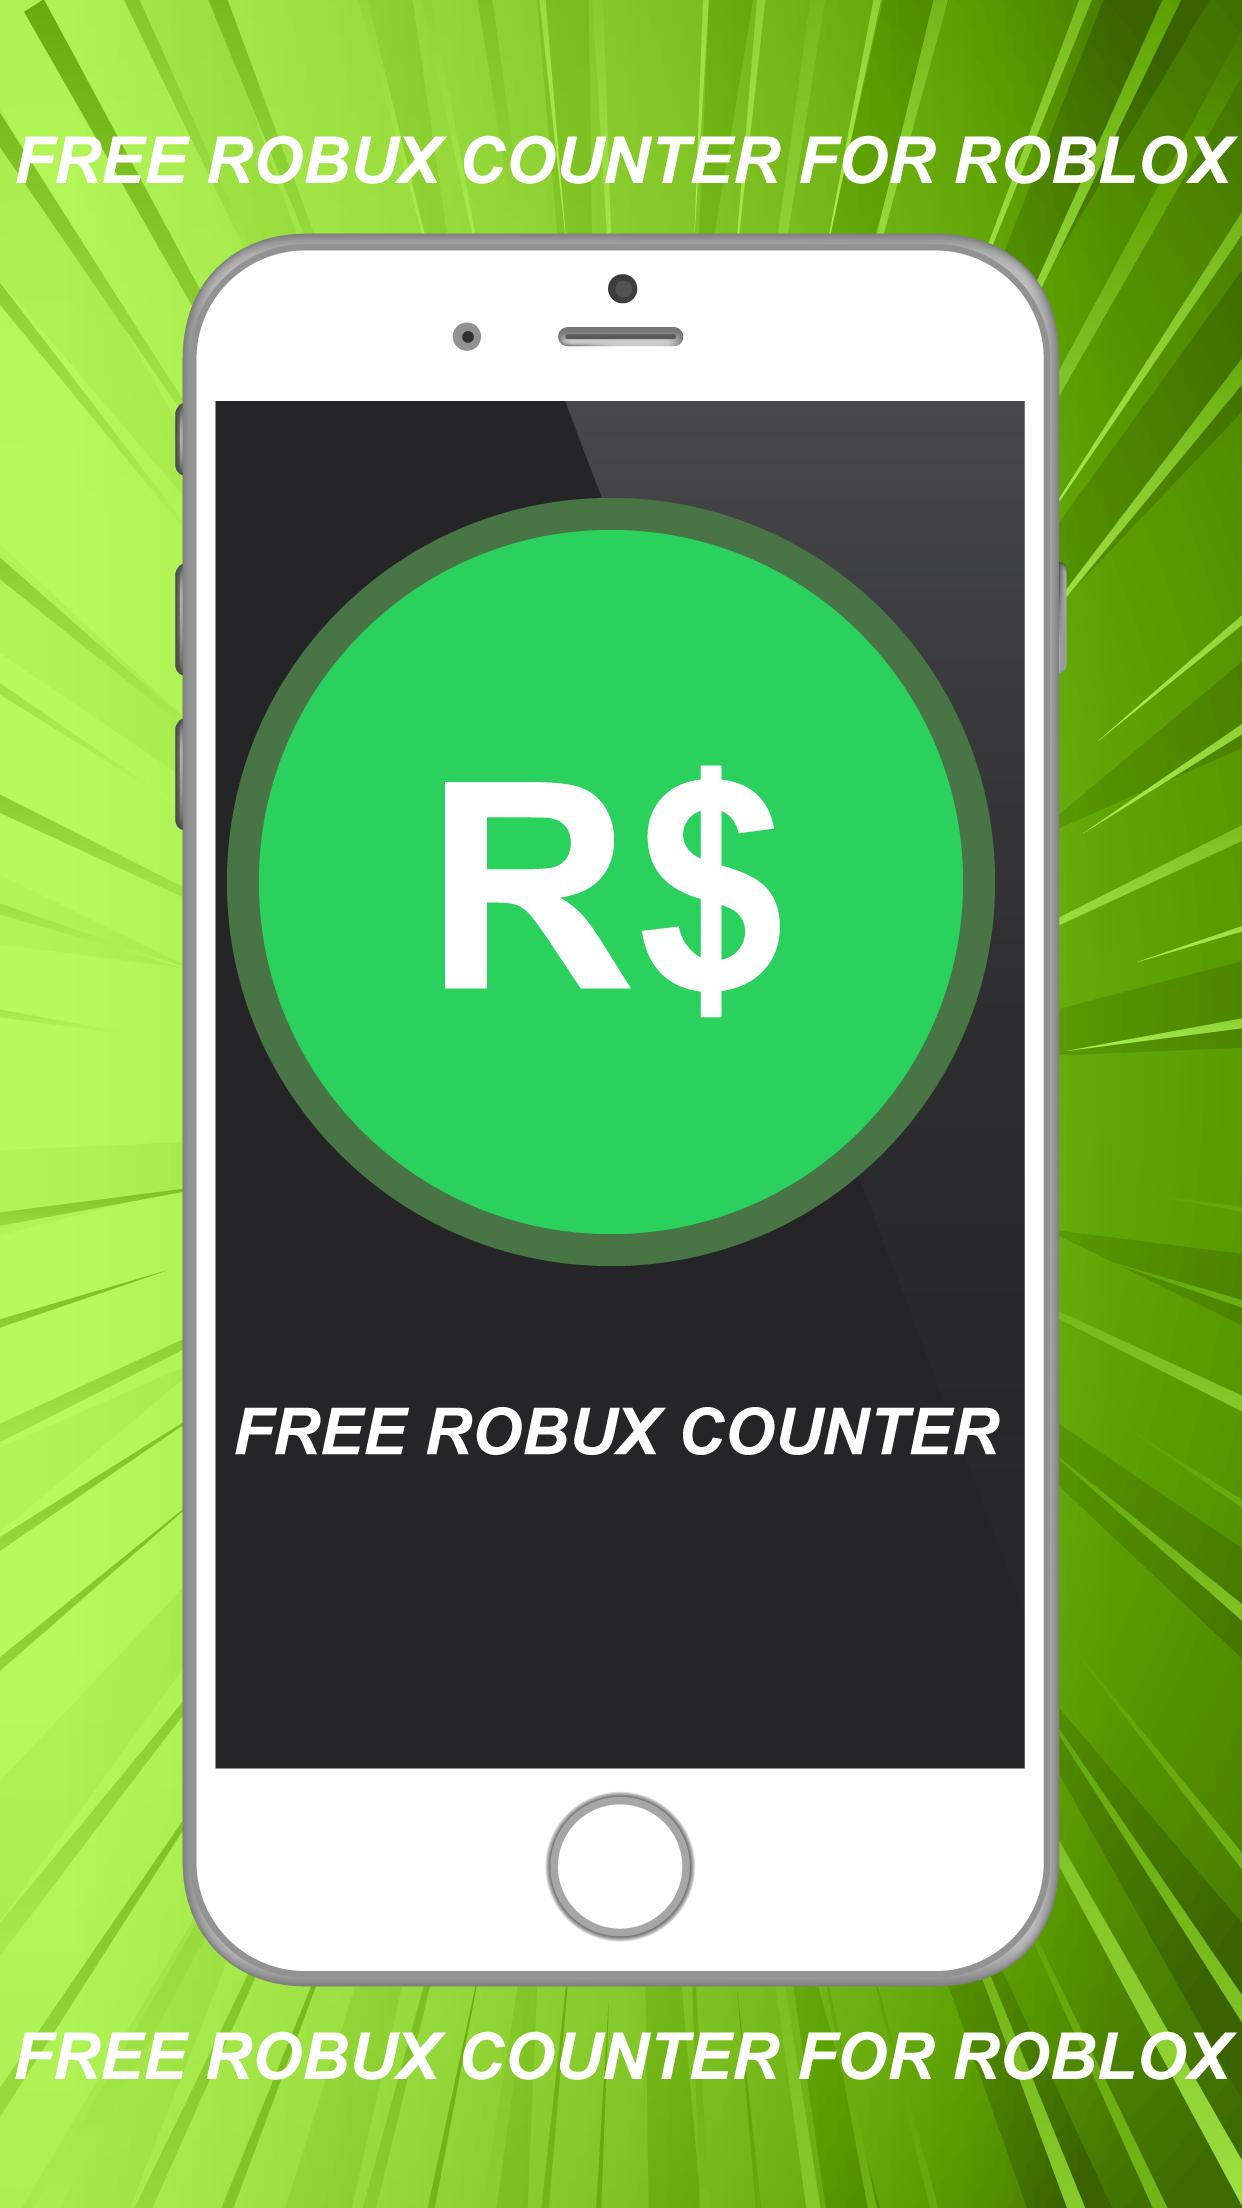 Free Robux Calc For Roblox 2020 For Android Apk Download - robux calc for roblox 2020 dans l app store